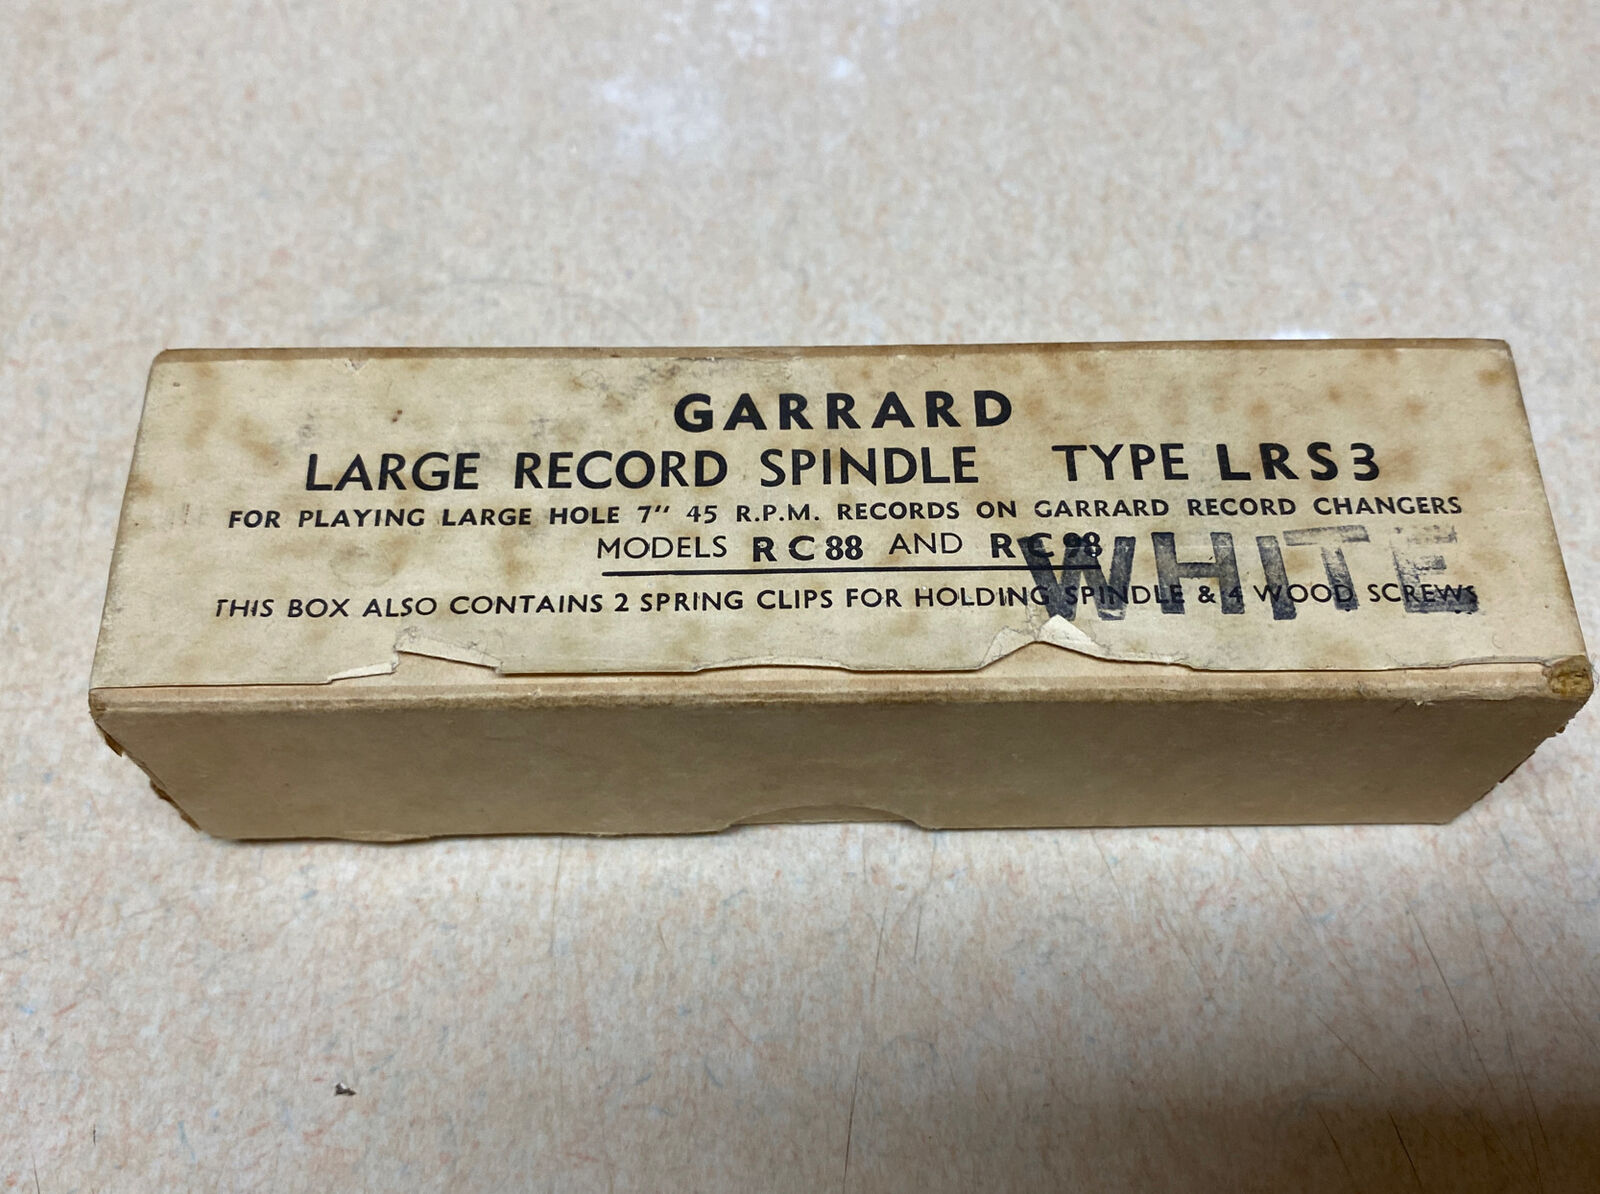 GARRARD TYPE LRS3 LARGE RECORD SPINDLE KIT IN BOX - New Old Stock